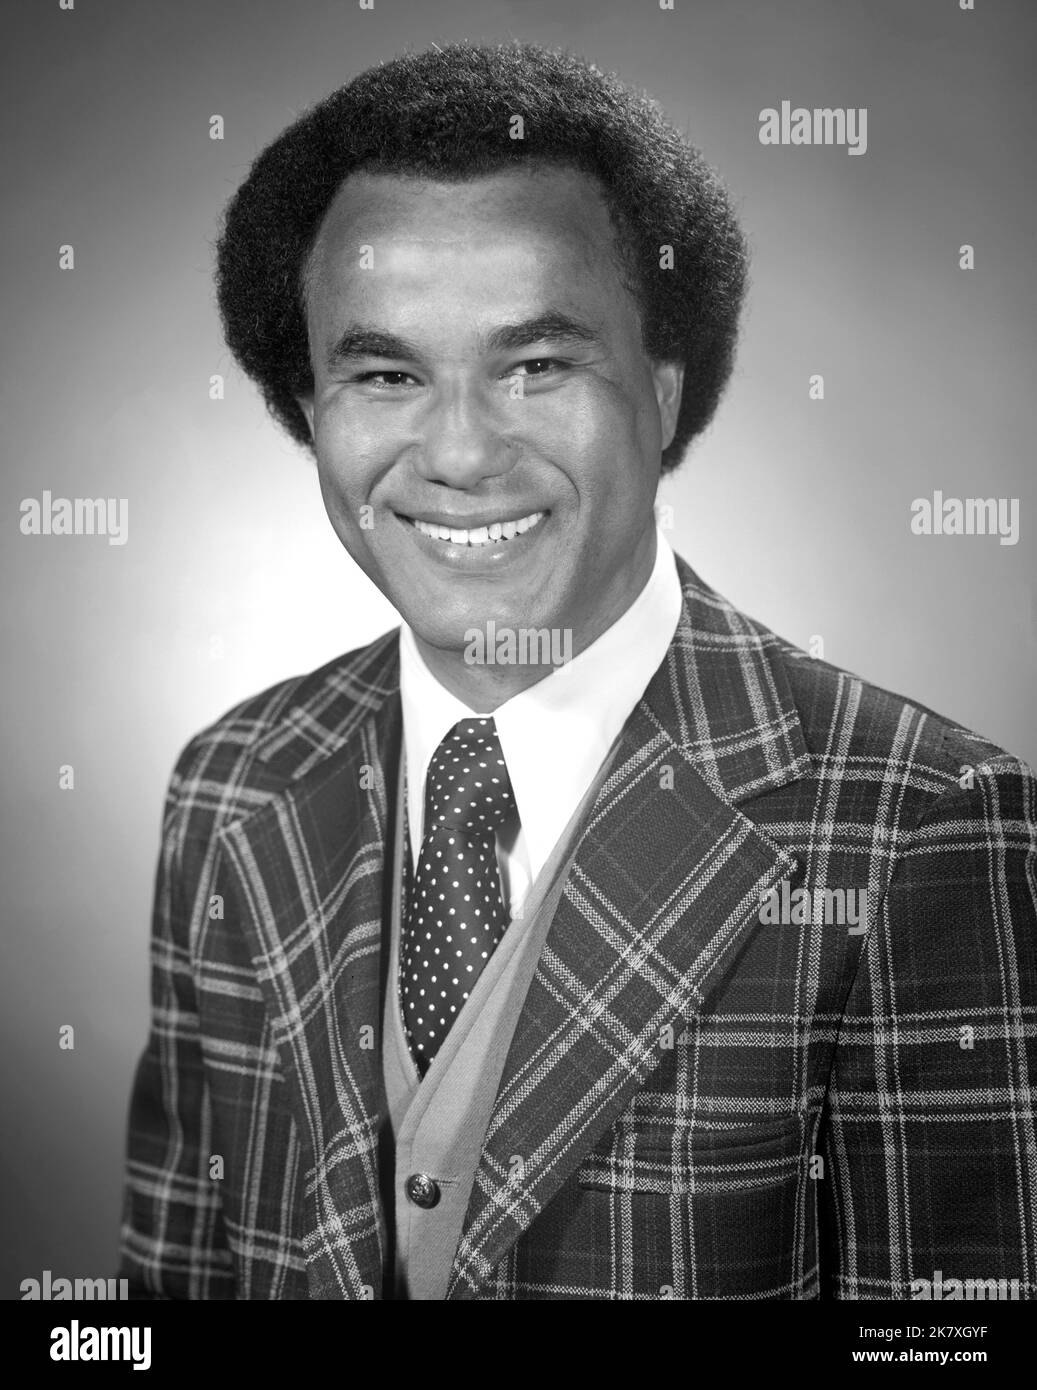 Portrait of Samuel J. Scott working in the Office of Directors for Structures NASA Langley. Photograph taken May 1977. Samuel J. Scott (1938 – 2021) engineer who was among the first four black engineers at NASA's Langley Research Center in 1962 Stock Photo